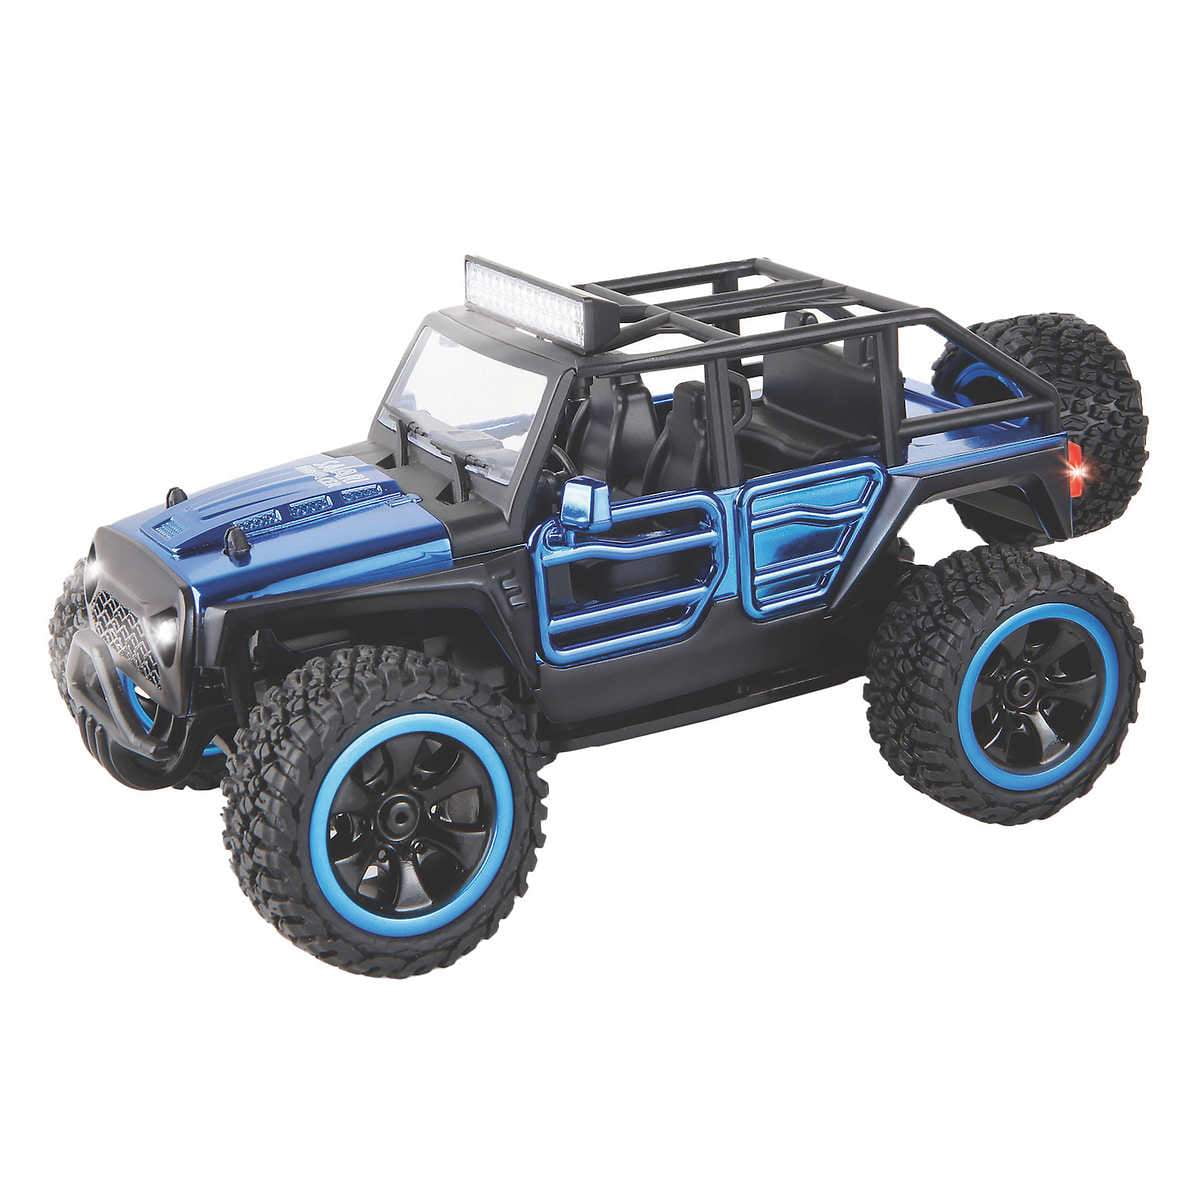 Power Craze Shift 24 4x4 Suspension RC Buggy up to 20mph for sale online 